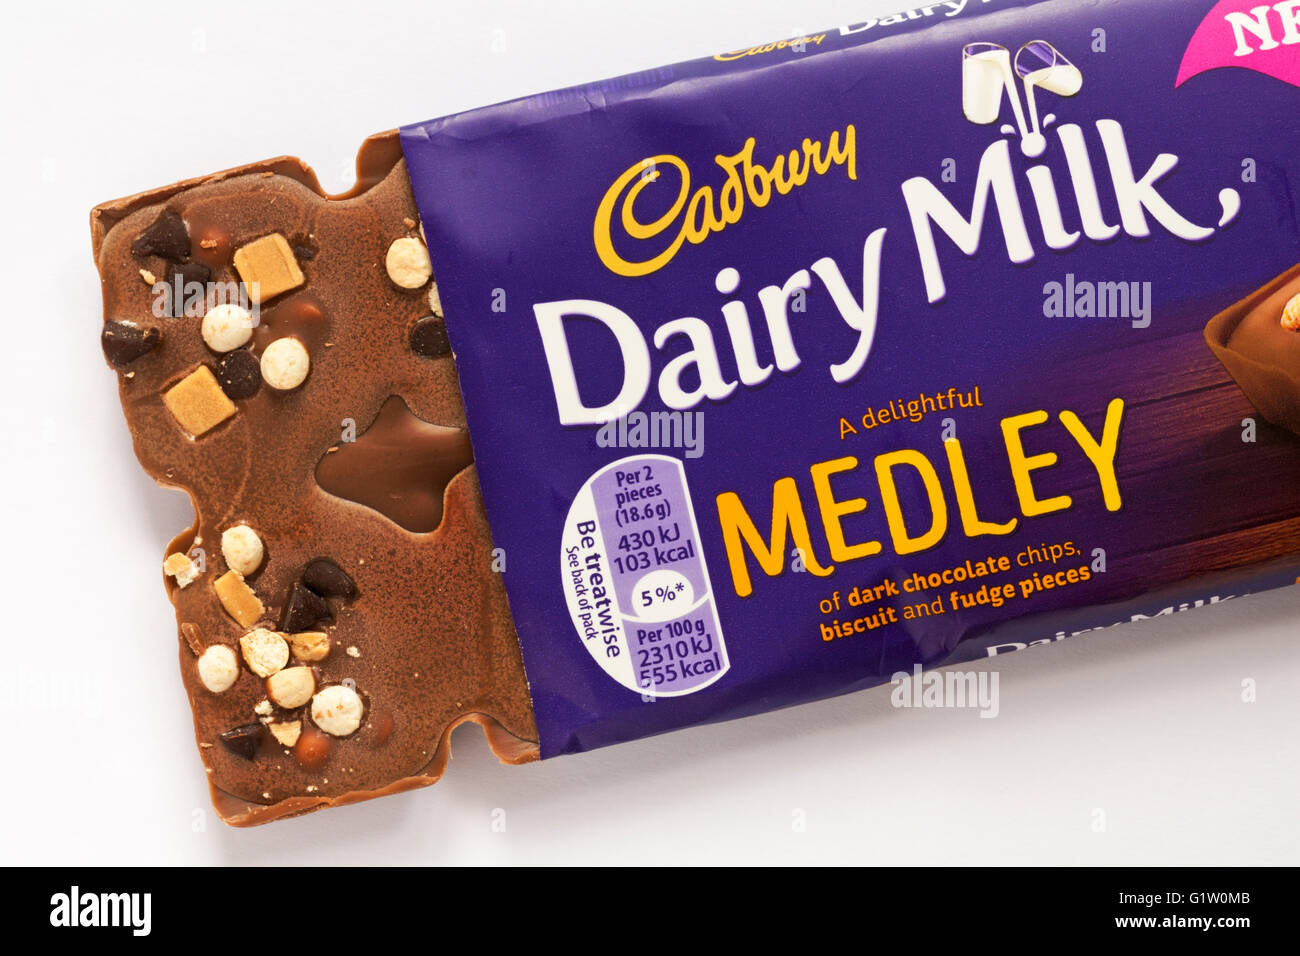 Opened Cadbury Dairy Milk Medley chocolate bar - a delightful medley of dark chocolate chips biscuit and fudge pieces set on white background Stock Photo